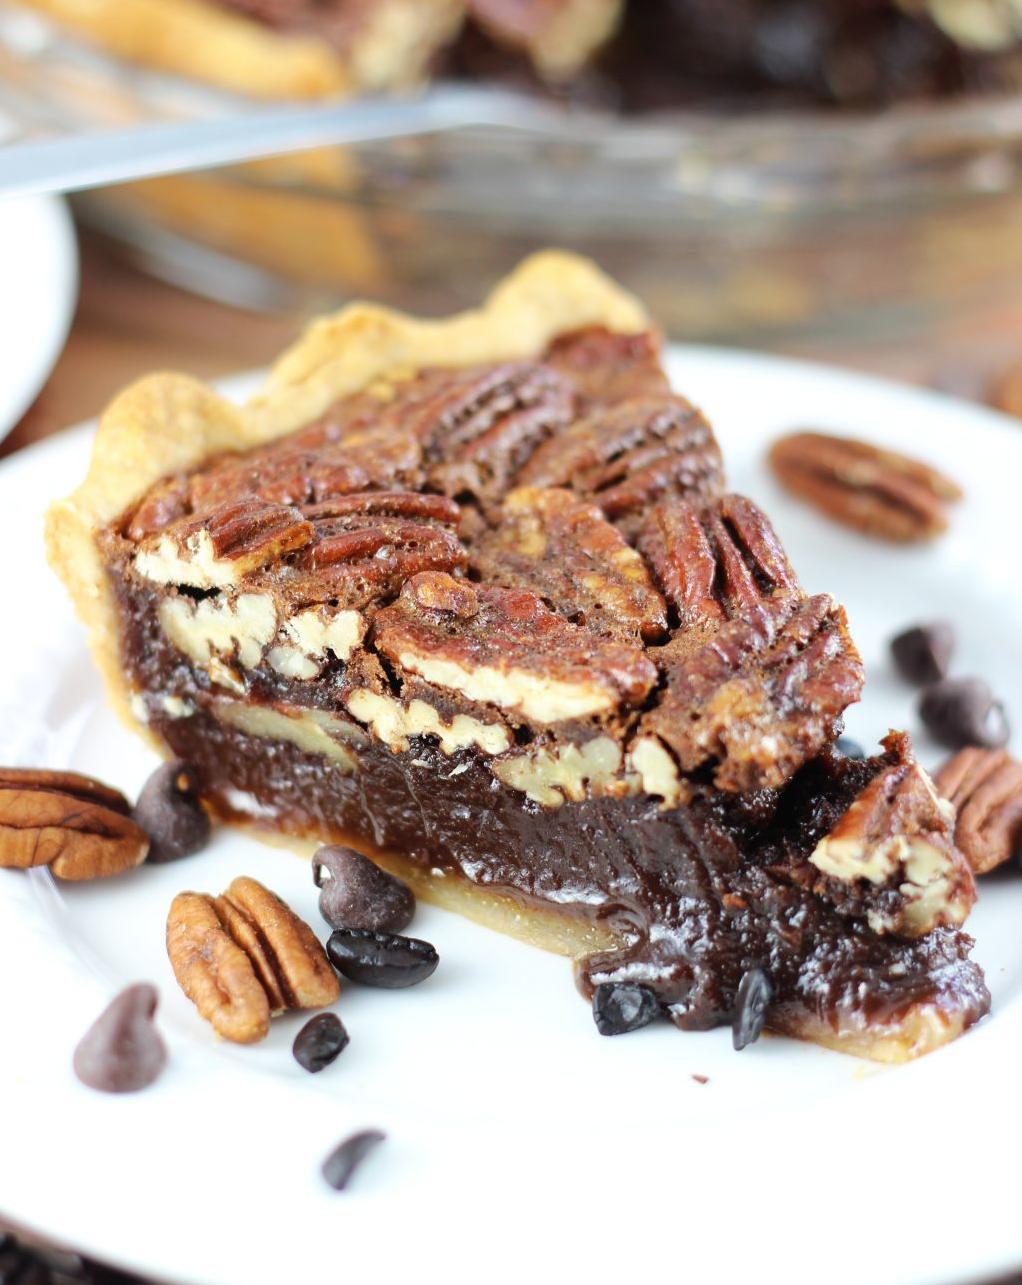  A rich and indulgent dessert awaits with this fudge-coffee pecan pie!